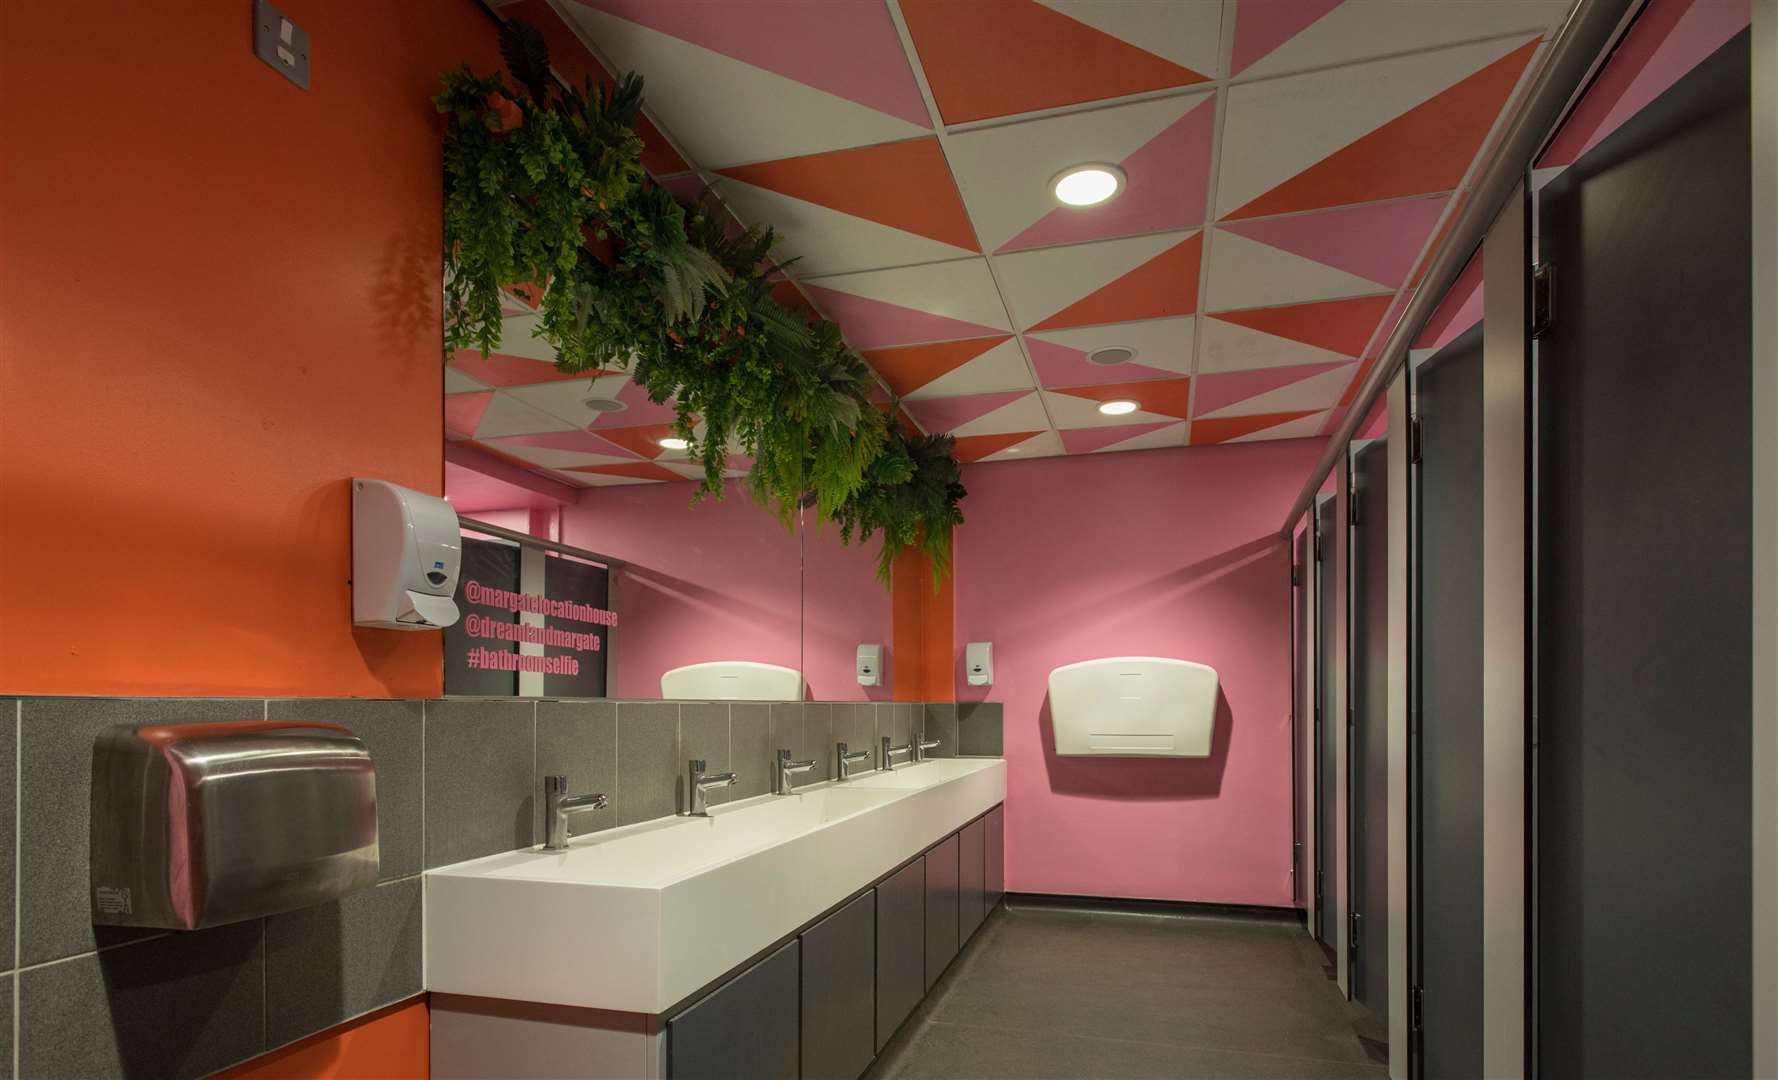 Dreamland's bathrooms are now decorated in bright colours for your selfies